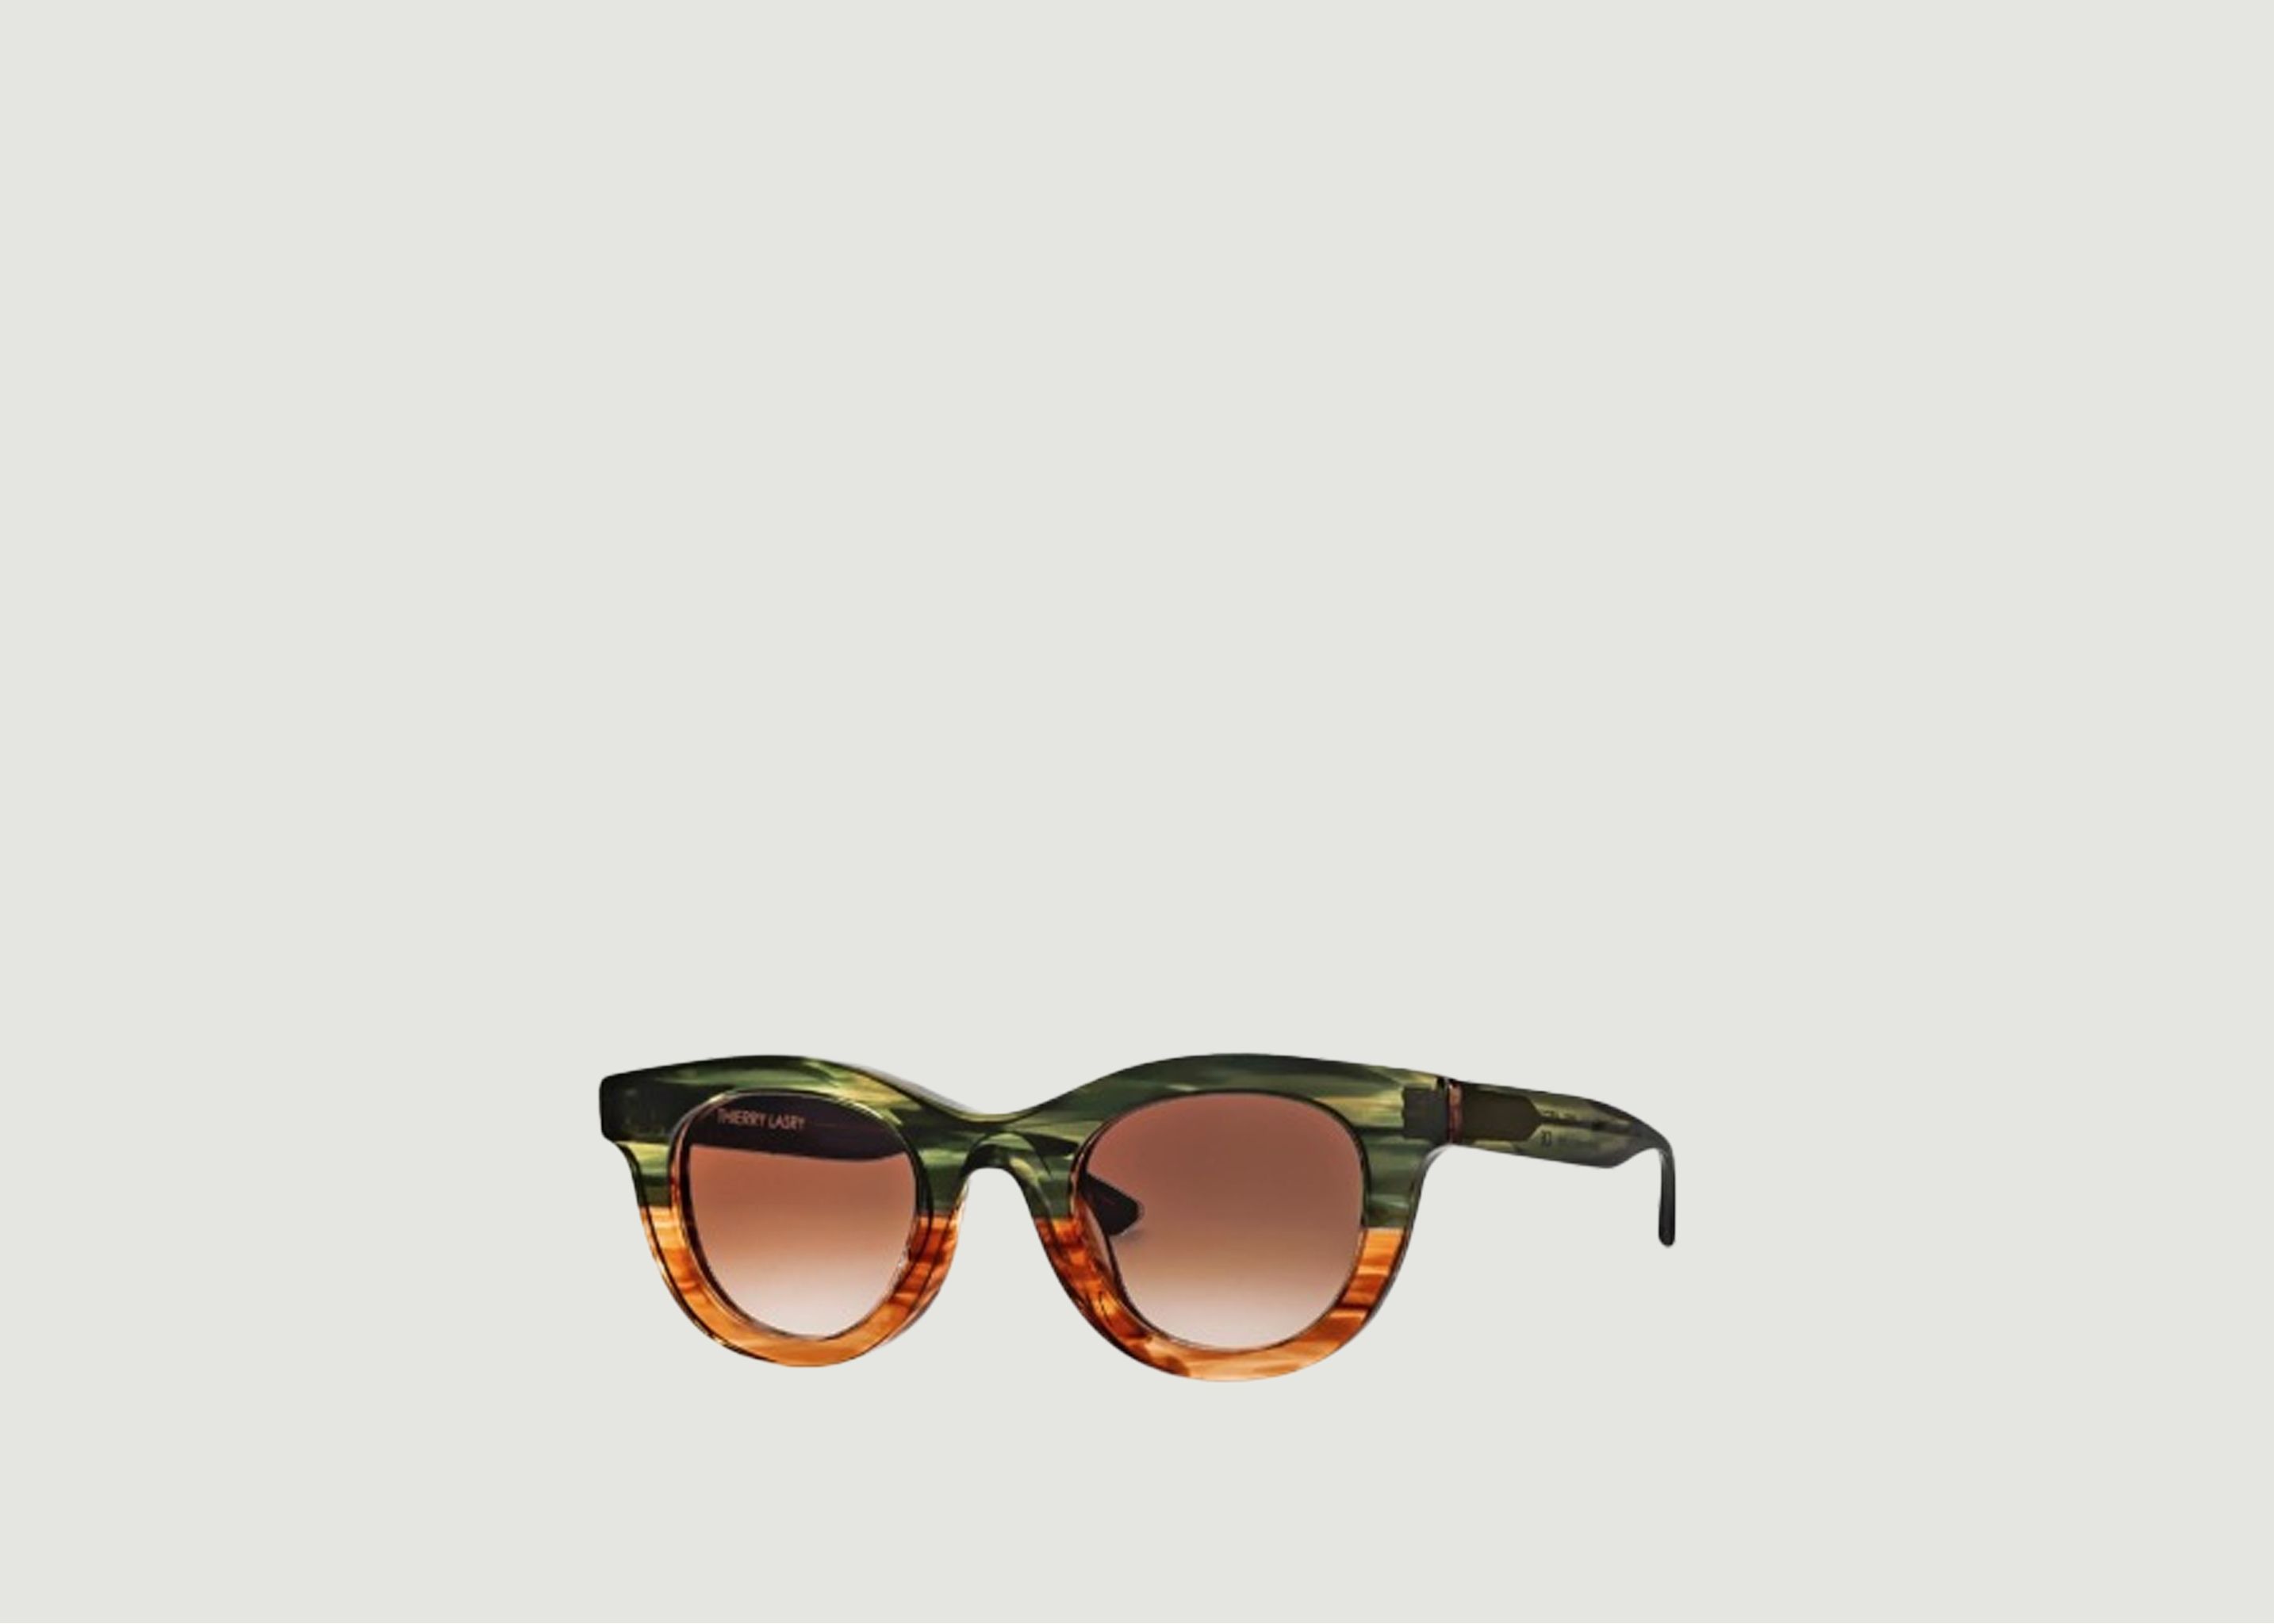 Consistency Sunglasses - Thierry Lasry